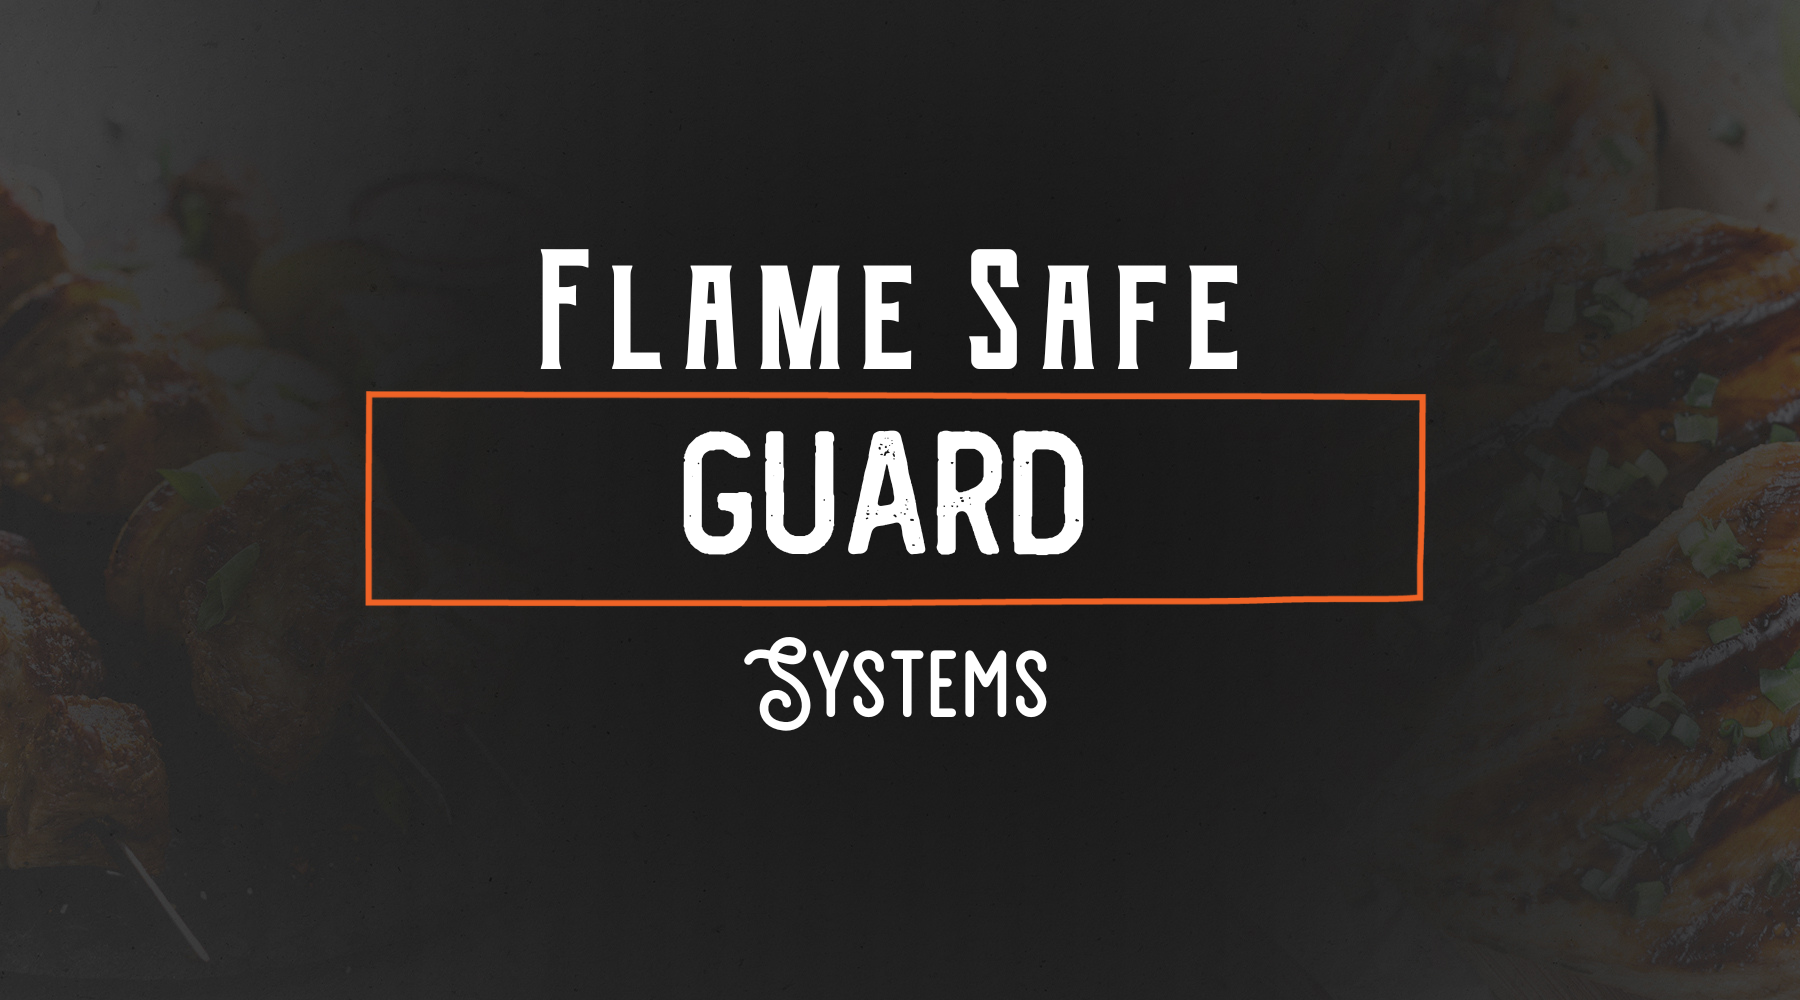 Flame safeguard systems